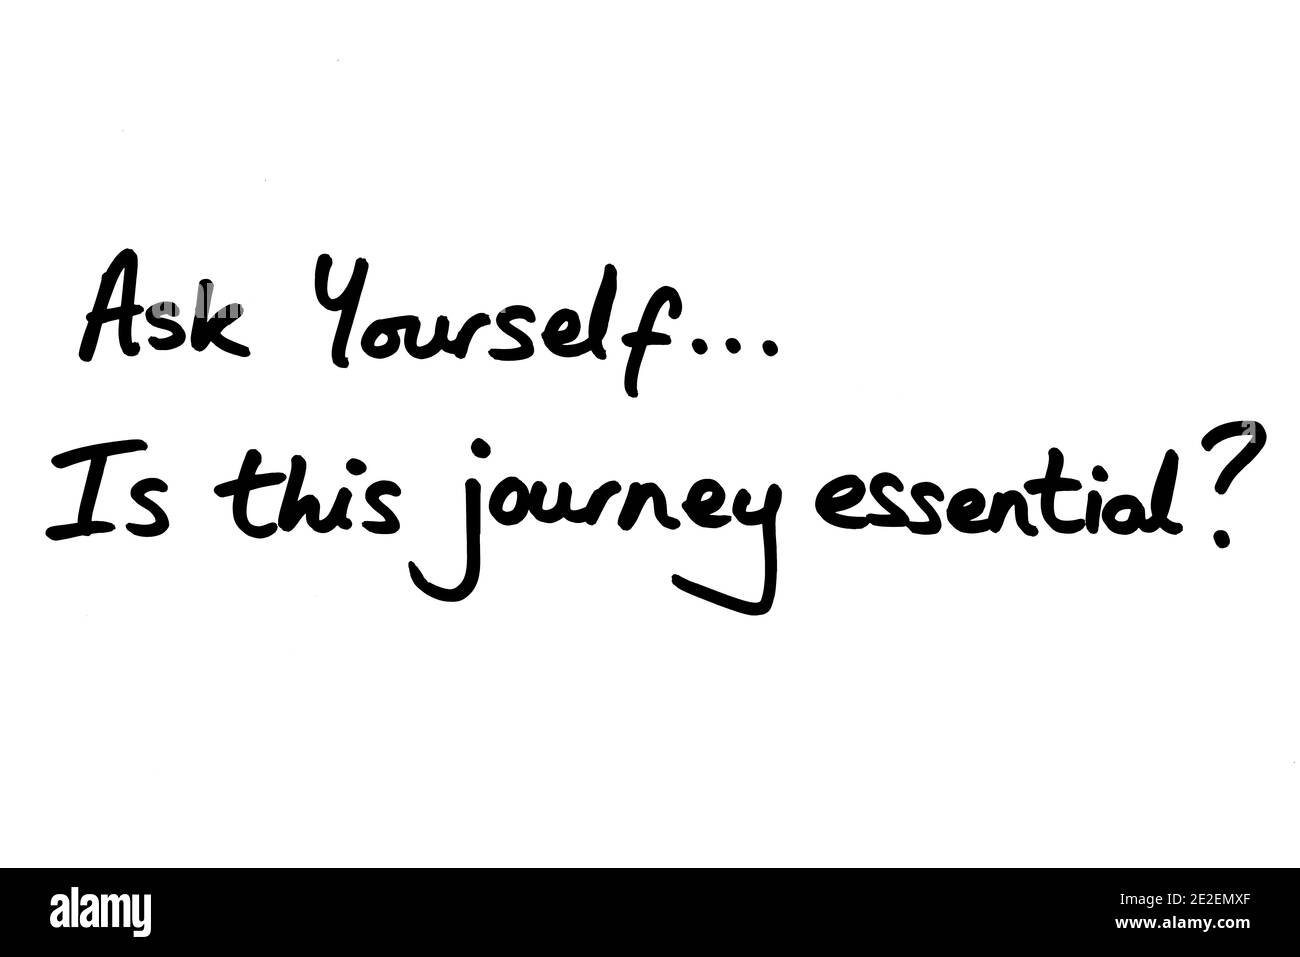 Ask Yourself…Is this journey essential? handwritten on a white background. Stock Photo